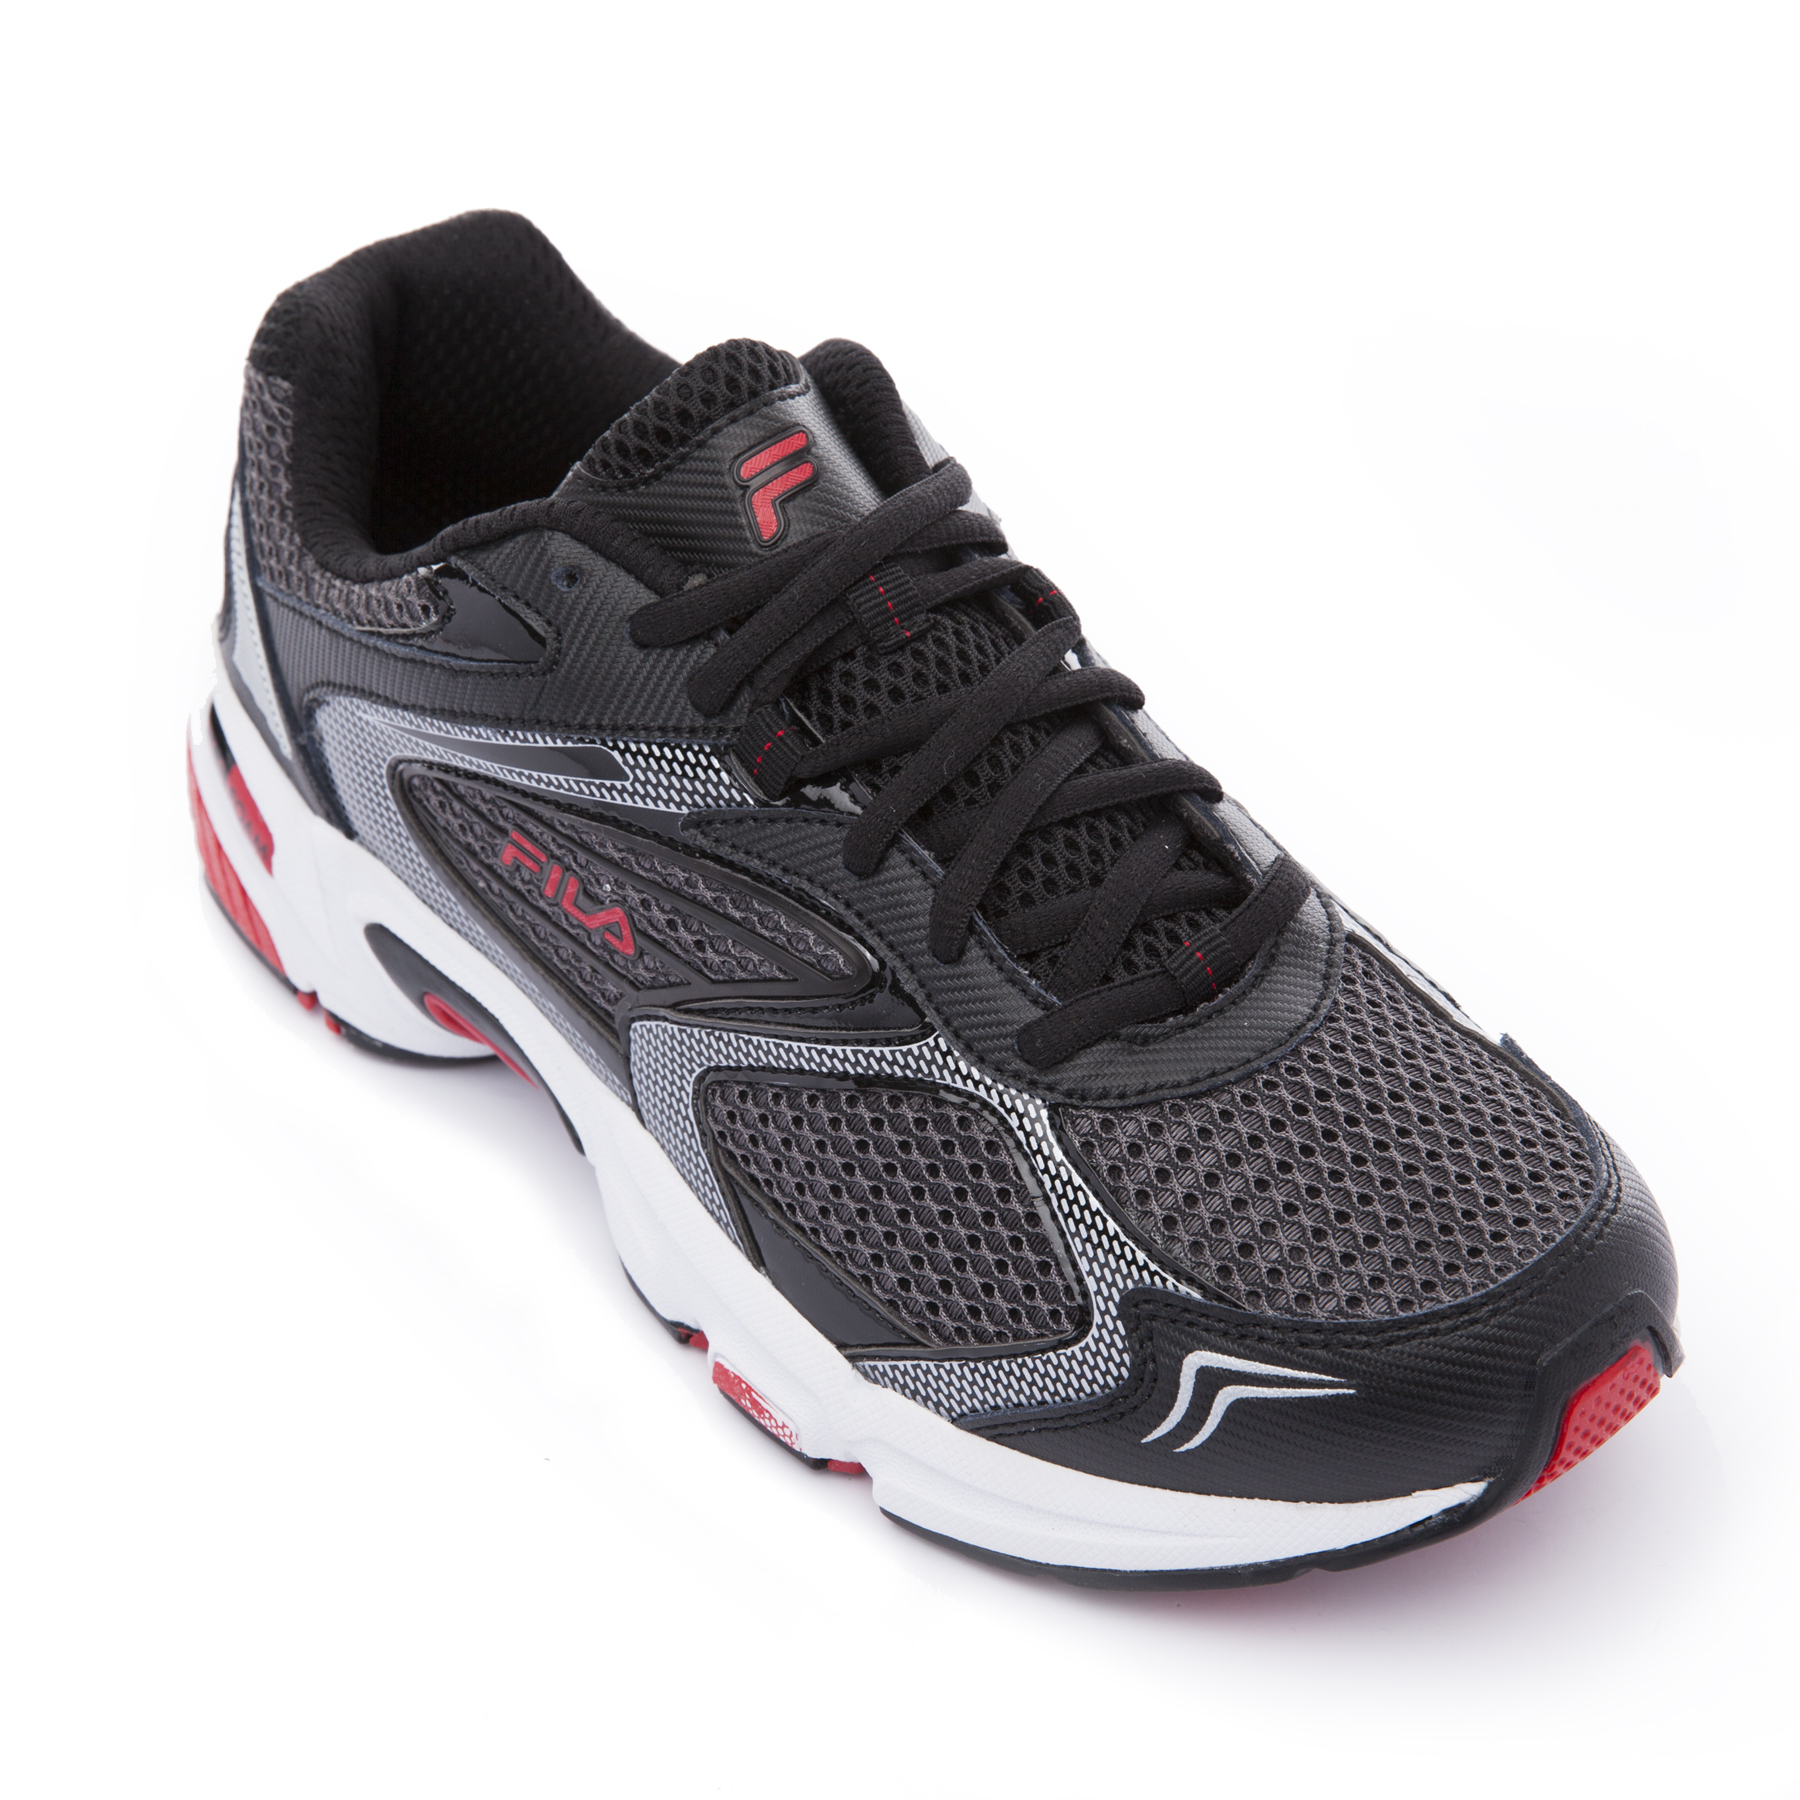 Fila Men’s Swerve 2 running shoe for $22 with free shipping